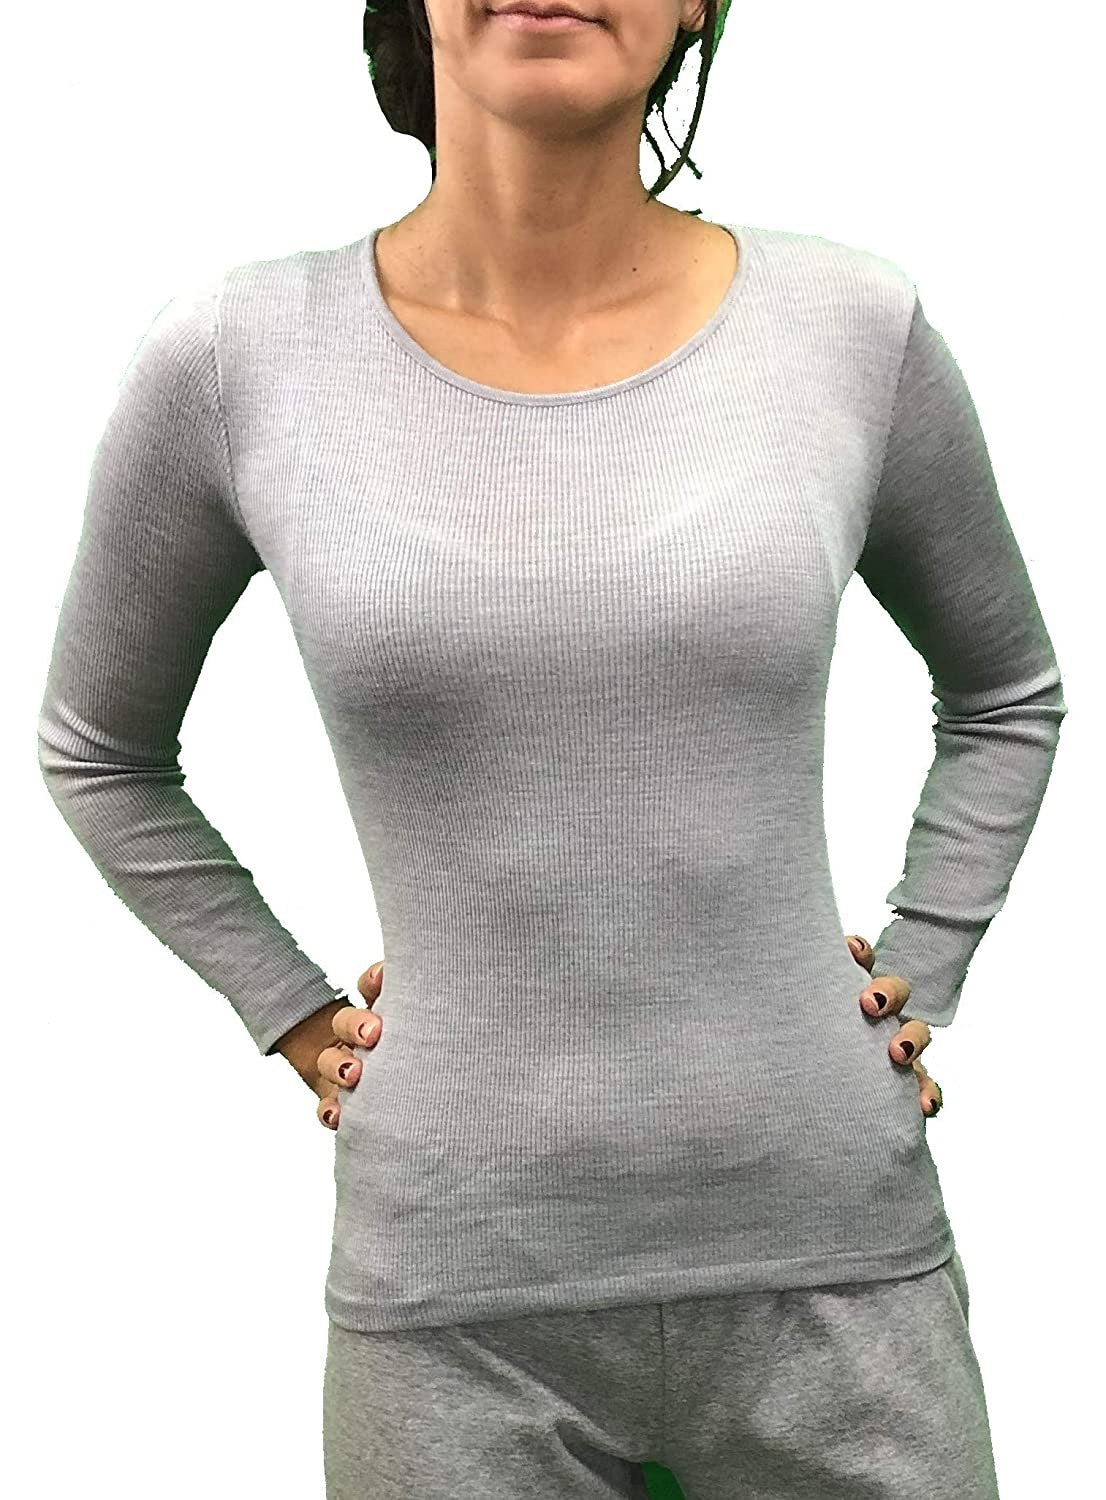 Lightweight soft long-sleeved top from the Wool-Modal line by Emmebivi from Italy.